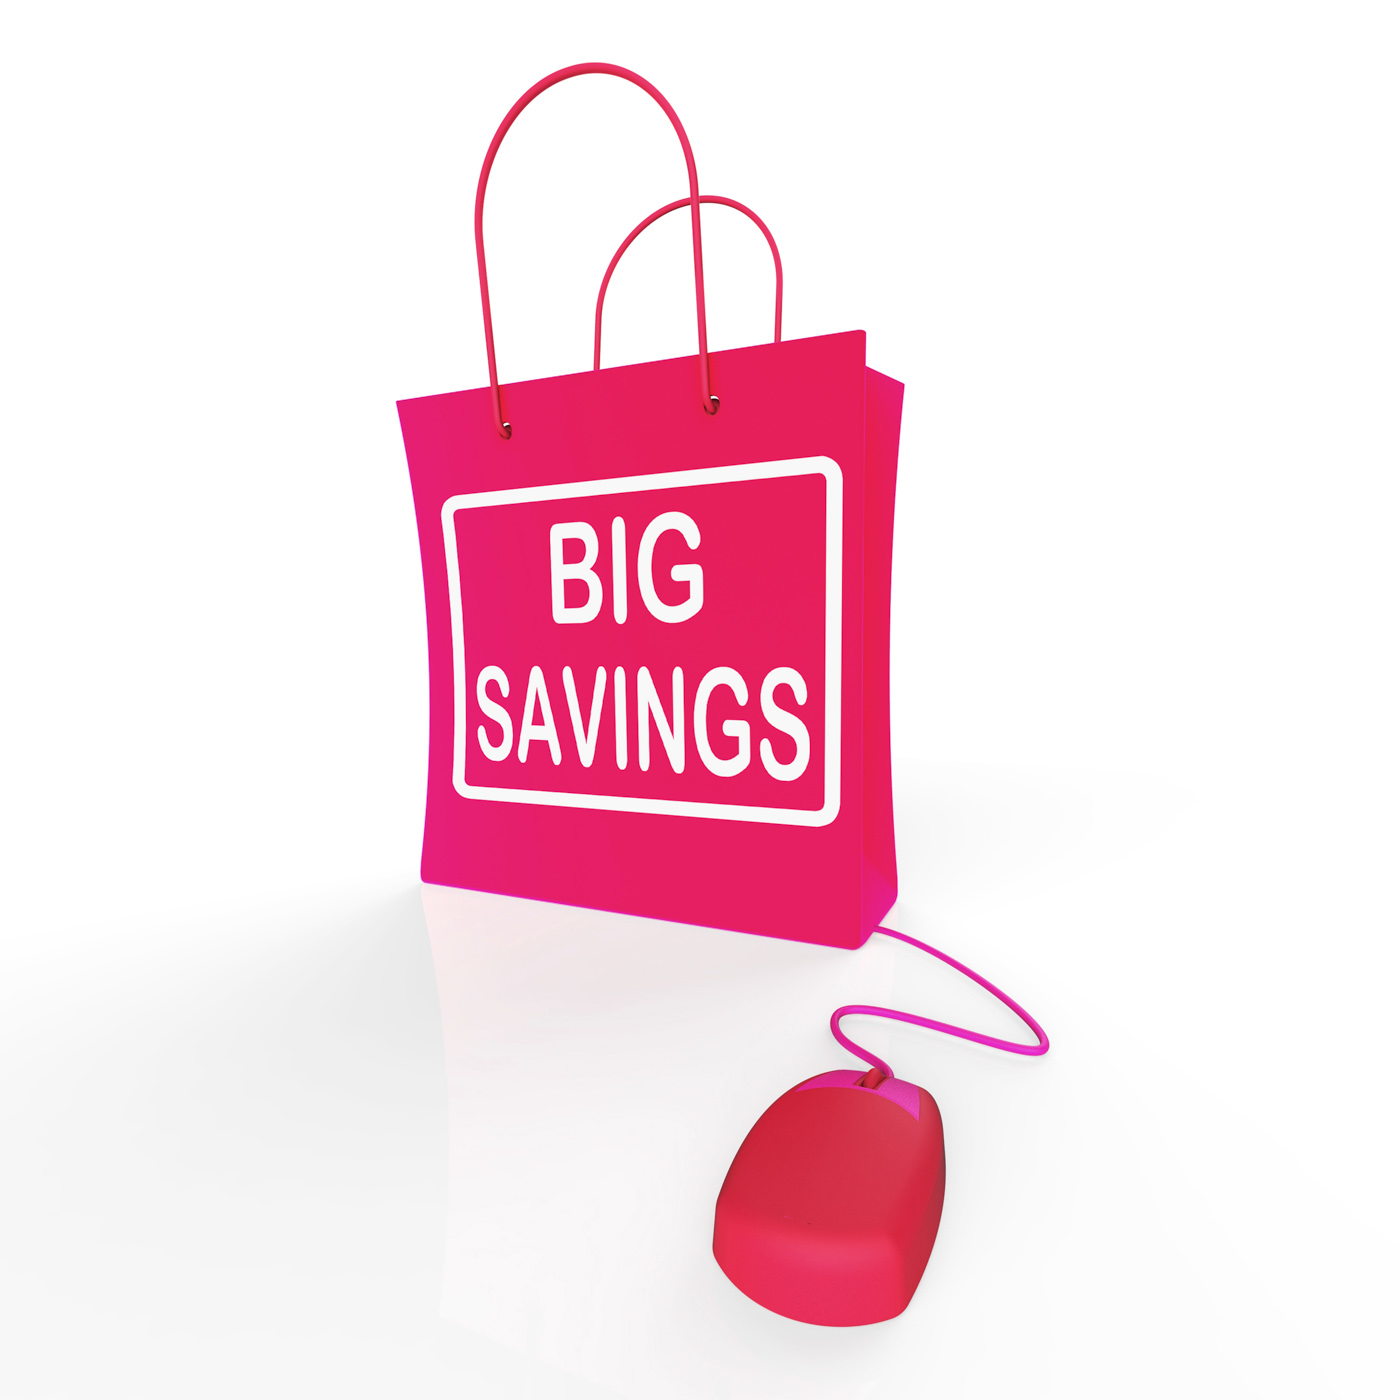 Big Savings Bag Shows Online Sales and Discounts, Bargain, Promotional, Specialoffer, Sign, HQ Photo